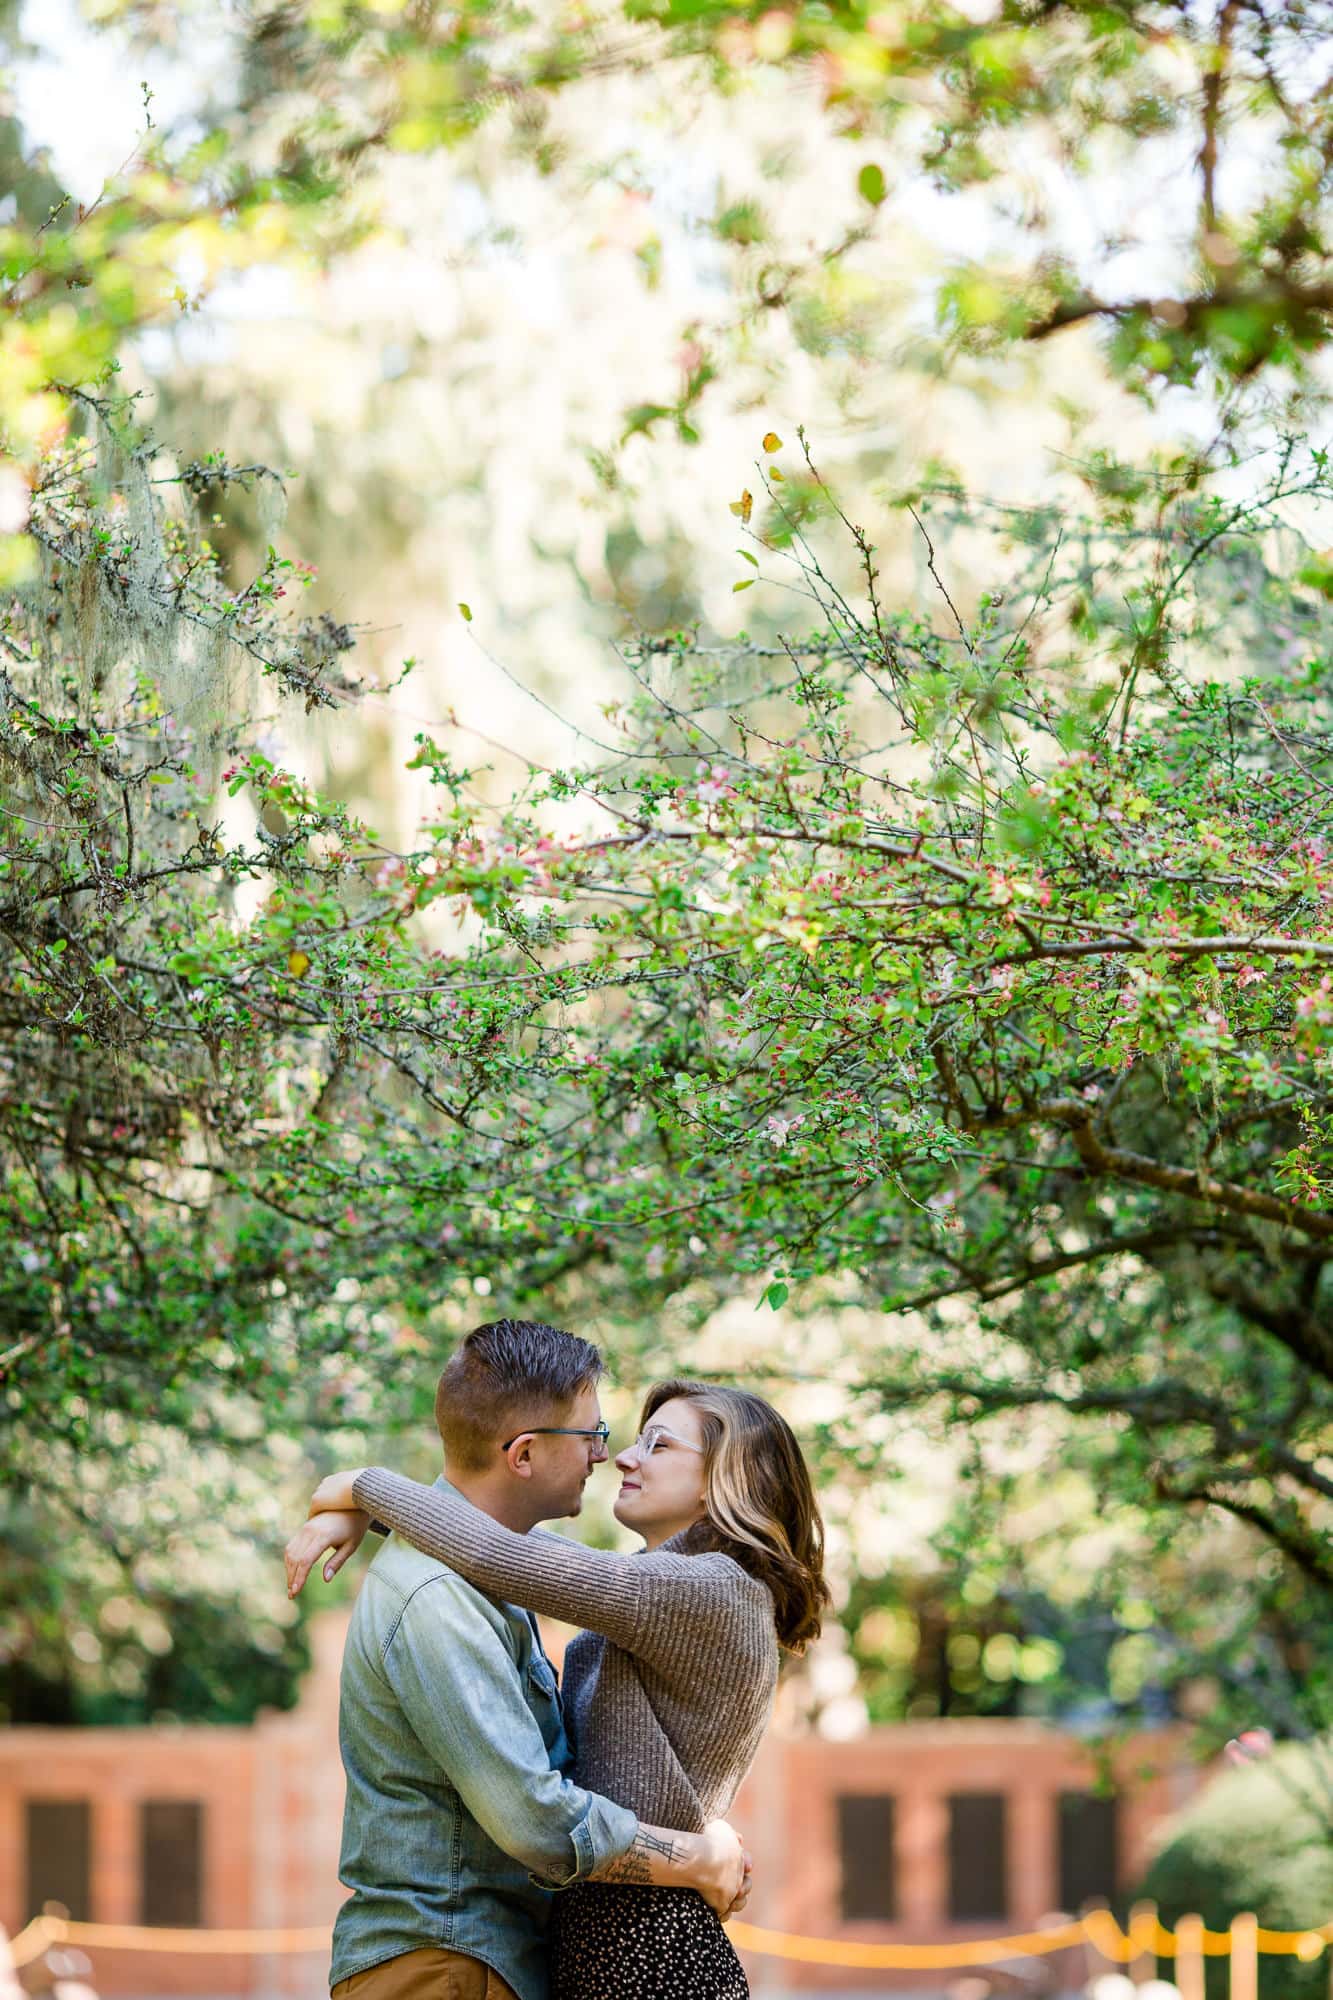 Couple embrace and lean in for kiss with trees behind them